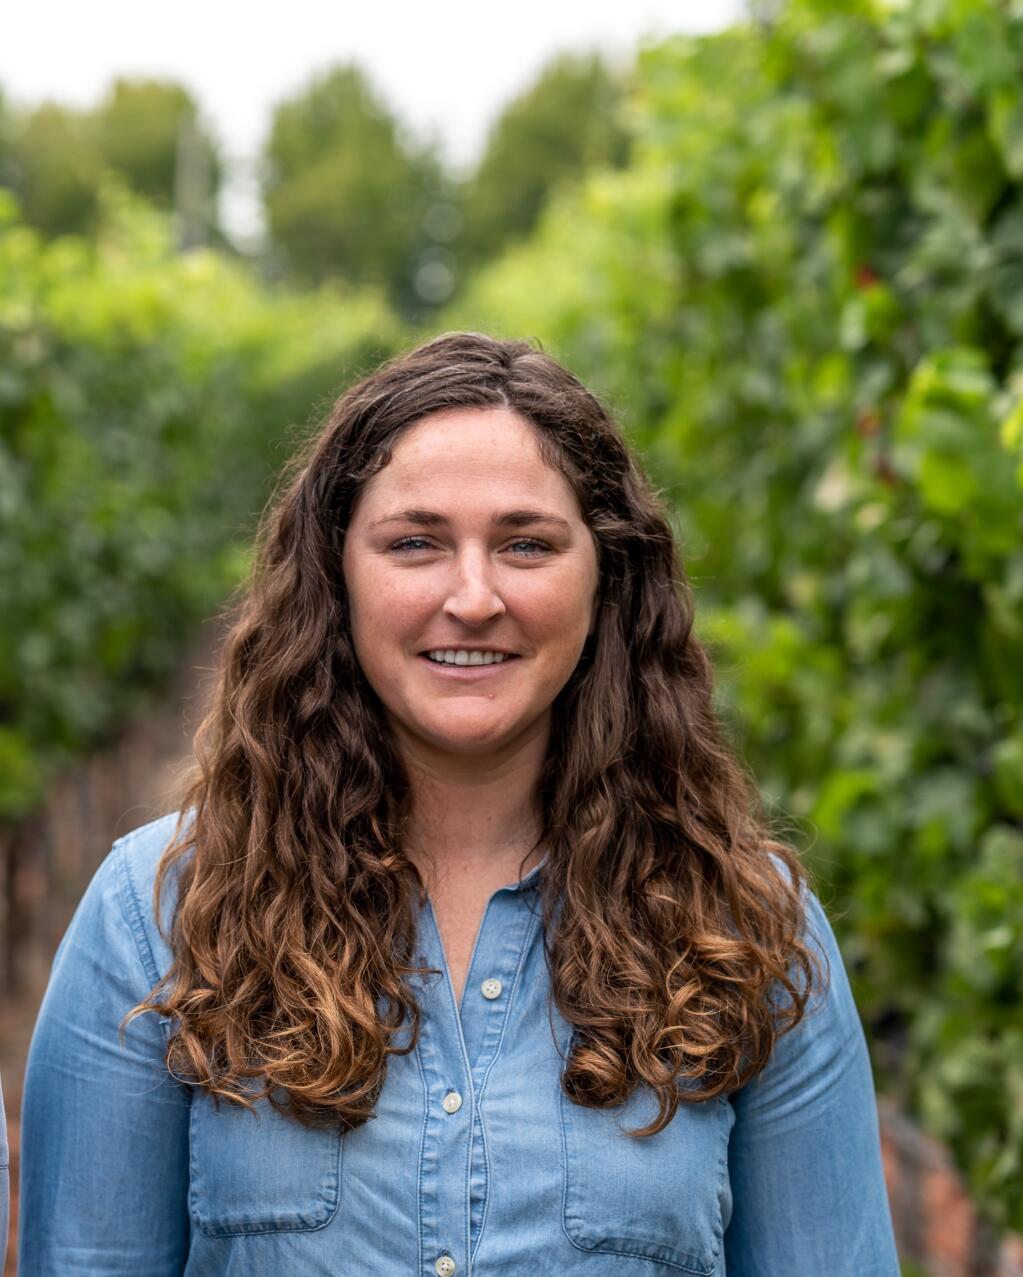 Mari Jones, 34, partner and president of Emeritus Vineyards in Sebastopol is a 2022 North Bay Business Journal Forty under 40 Award winner. The winners will be recognized Tuesday, April 19 event from 4 to 6:30 p.m. at The Barlow in Sebastopol. (Scot Hampton photo)